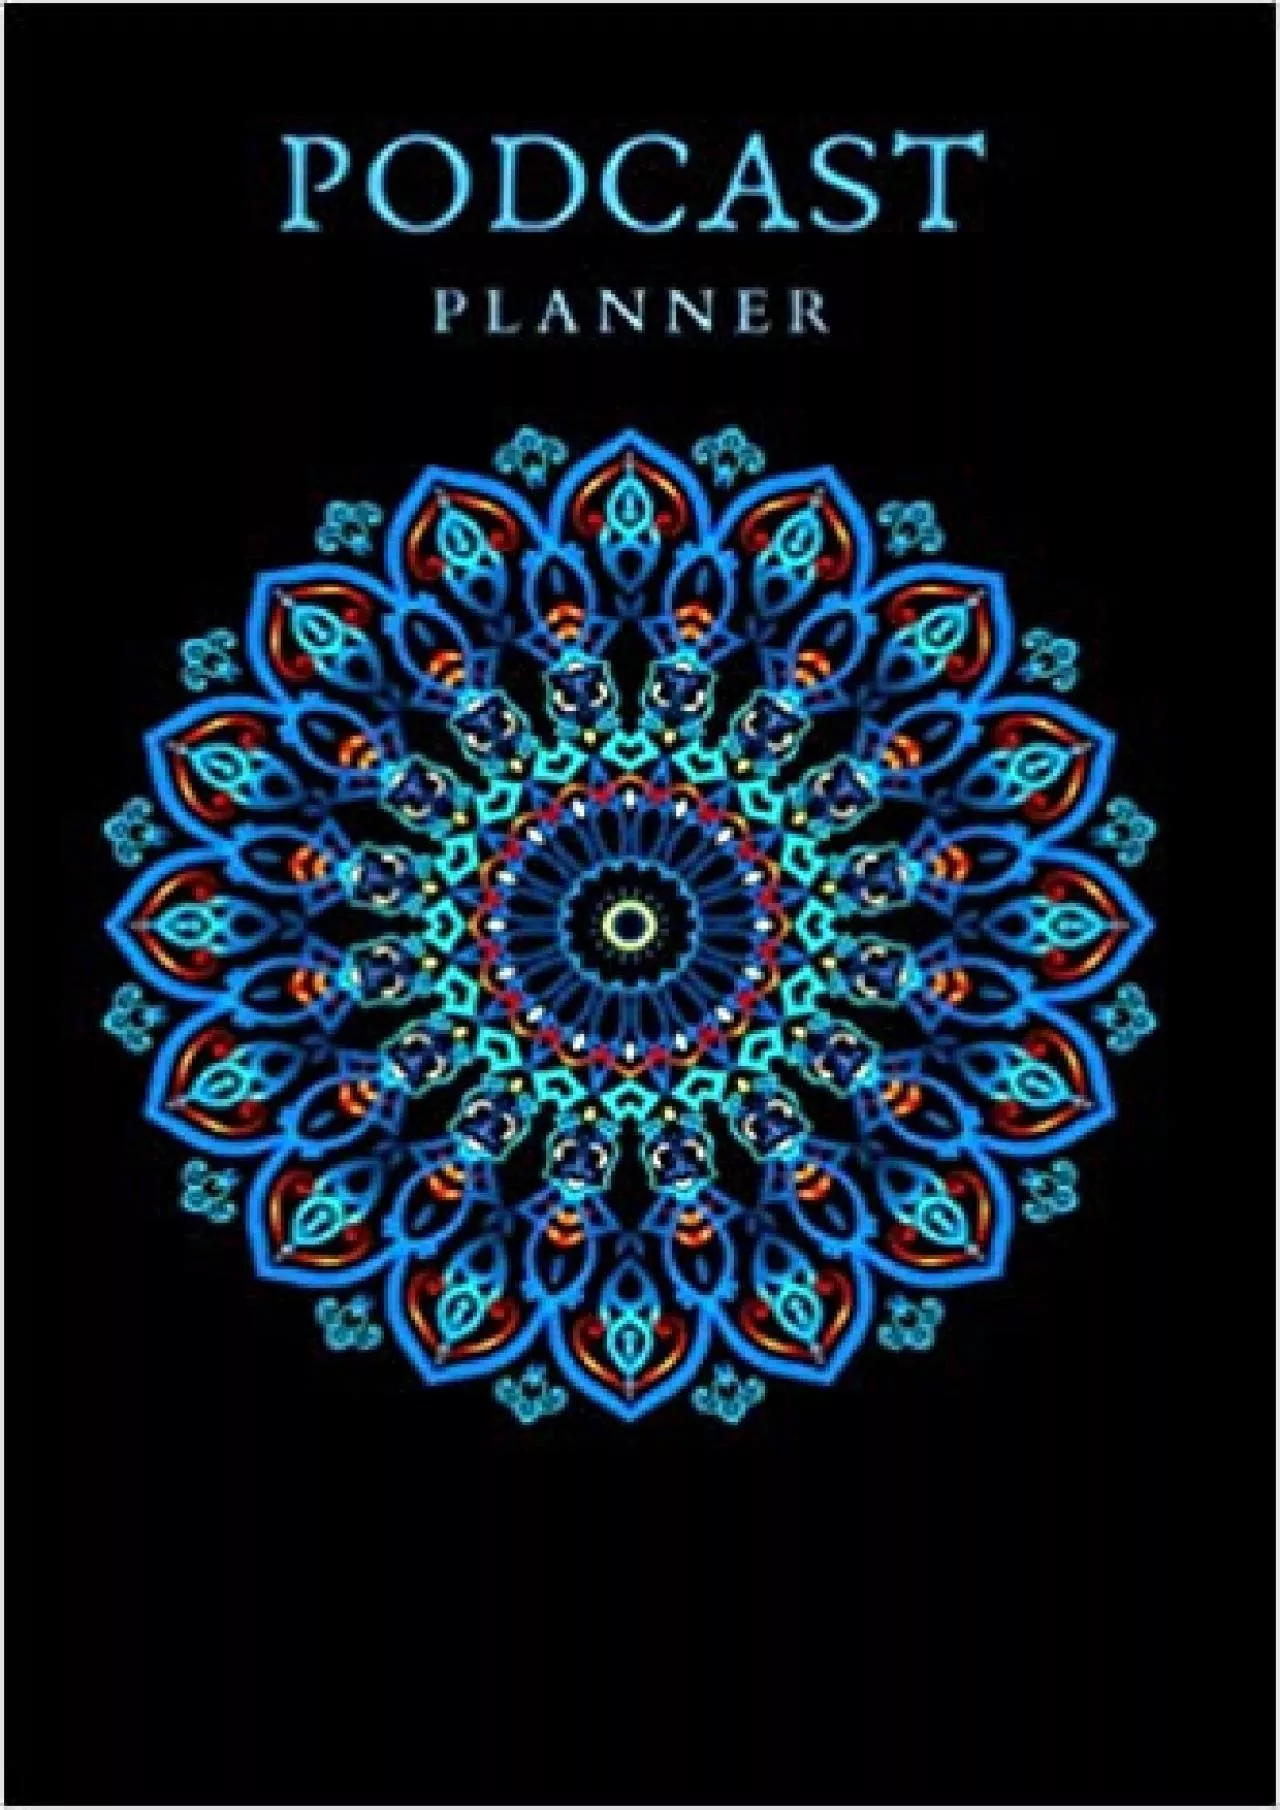 (BOOK)-Podcast Planner: Blue Black Episode Journal | Plan and save notes | Host | Date